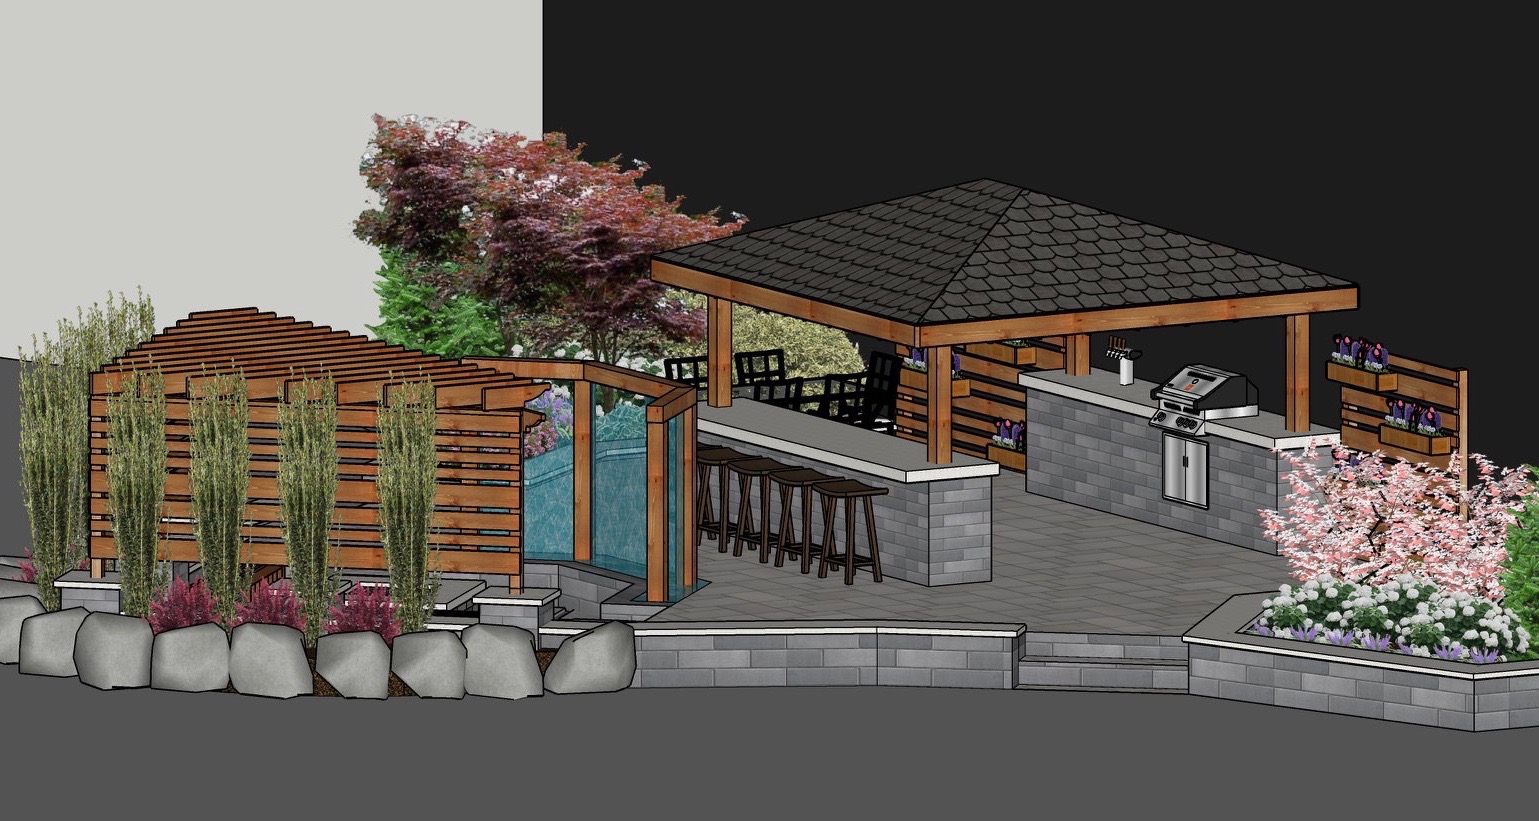 Precision Outdoors Indianapolis Home show 2019 Design Render Indianapolis Indiana Exterior Design Outdoor Living sunken porcelain fire pit space freestanding water wall structure cedar pergola screening walls privacy screens privacy walls with custom planters rough cedar pavilion gathering space outdoor kitchen grill bar space paver patio walls walkways